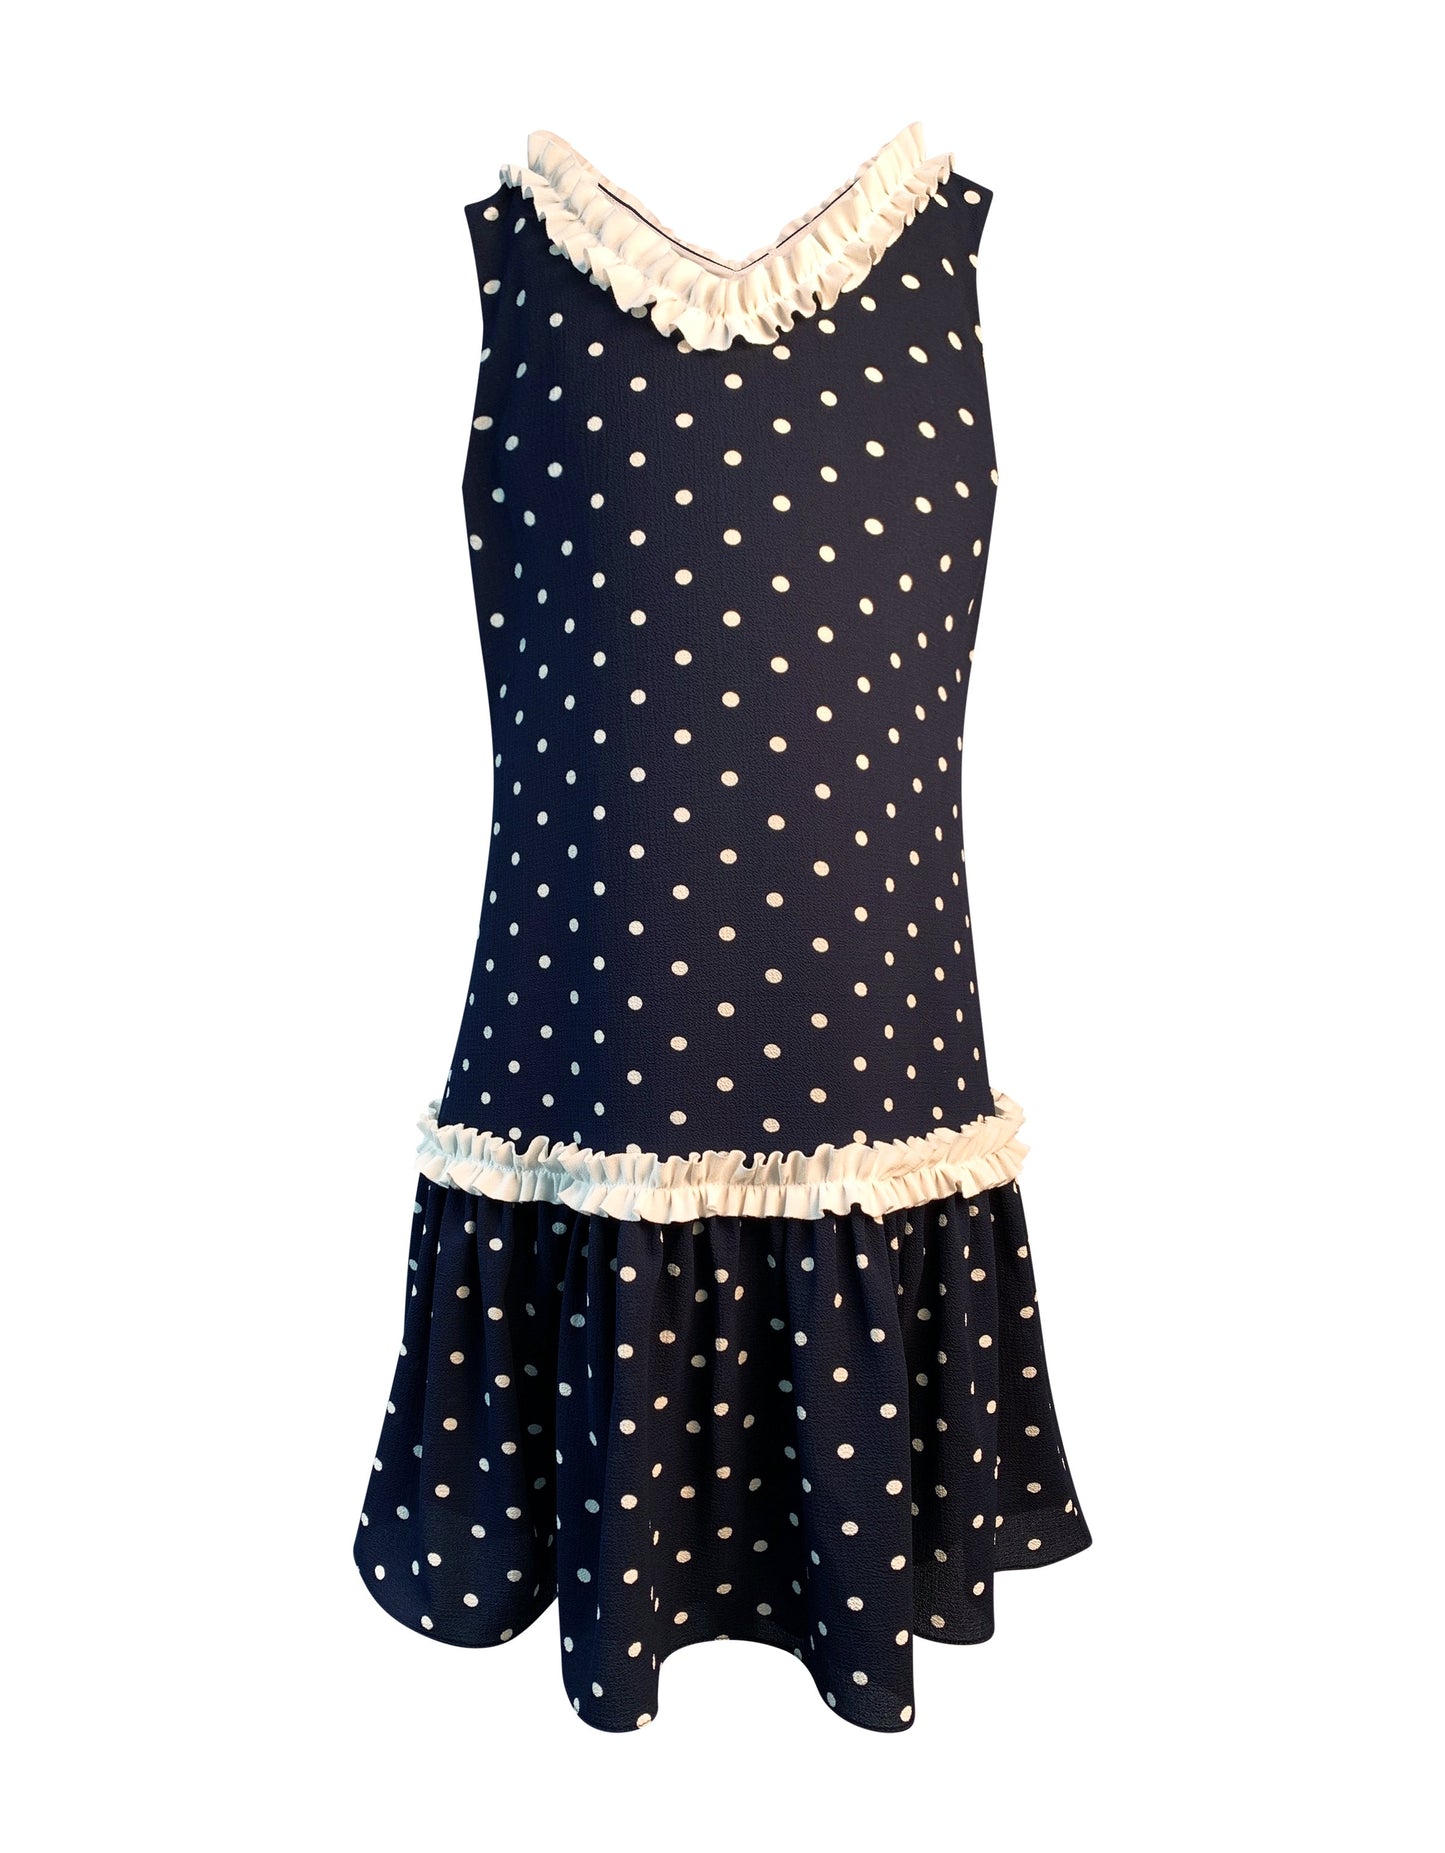 Helena and Harry Girl's Navy with White Dots and Ruffles Dress